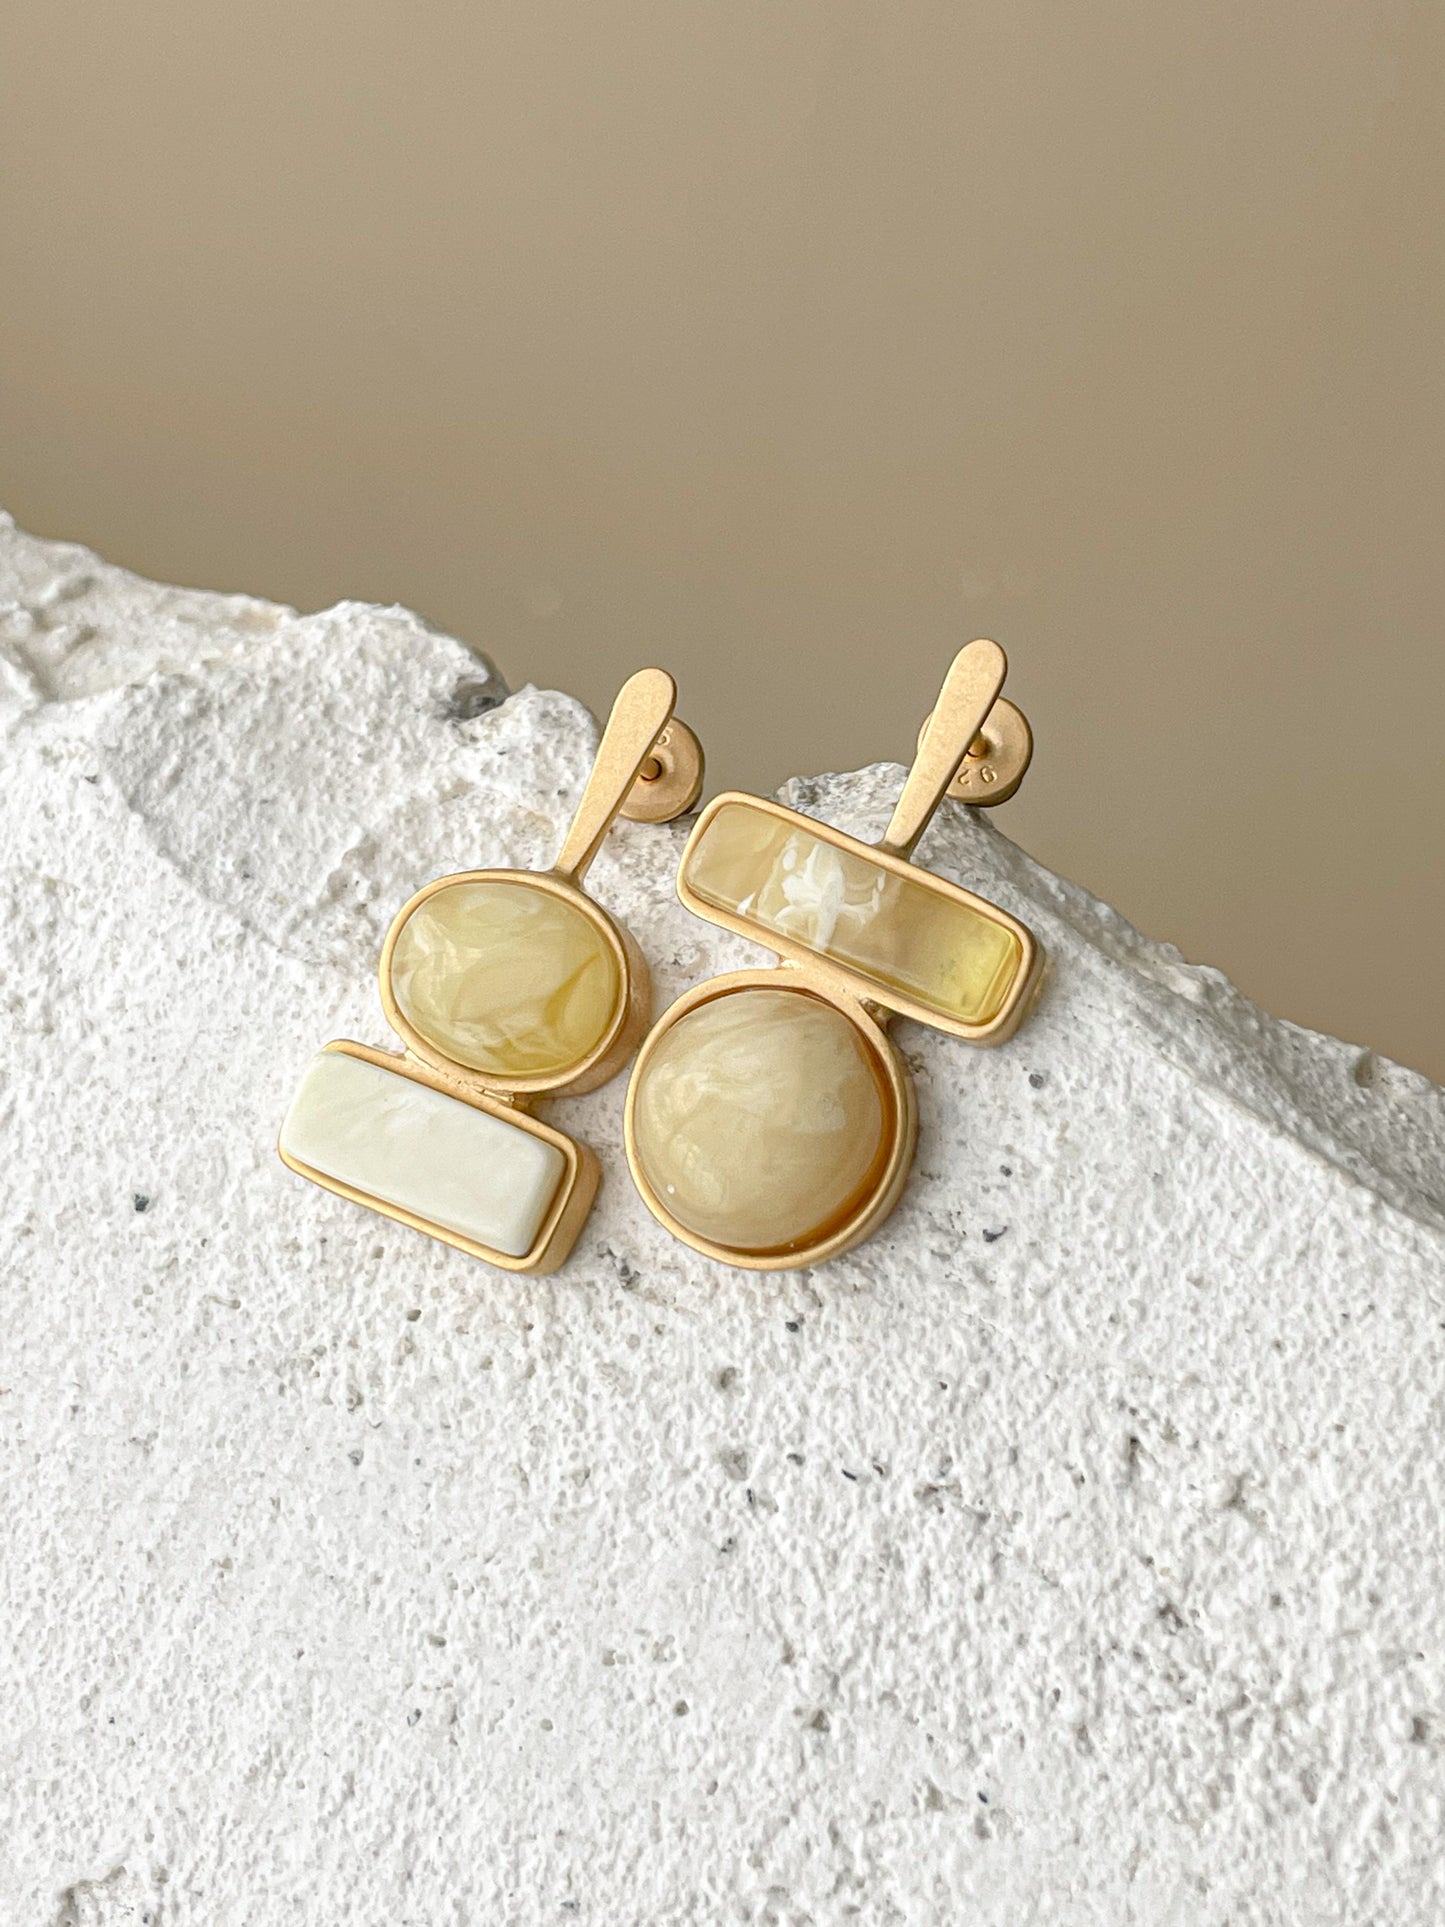 Amber stud earrings - Gold plated silver - Mismatched earrings collection